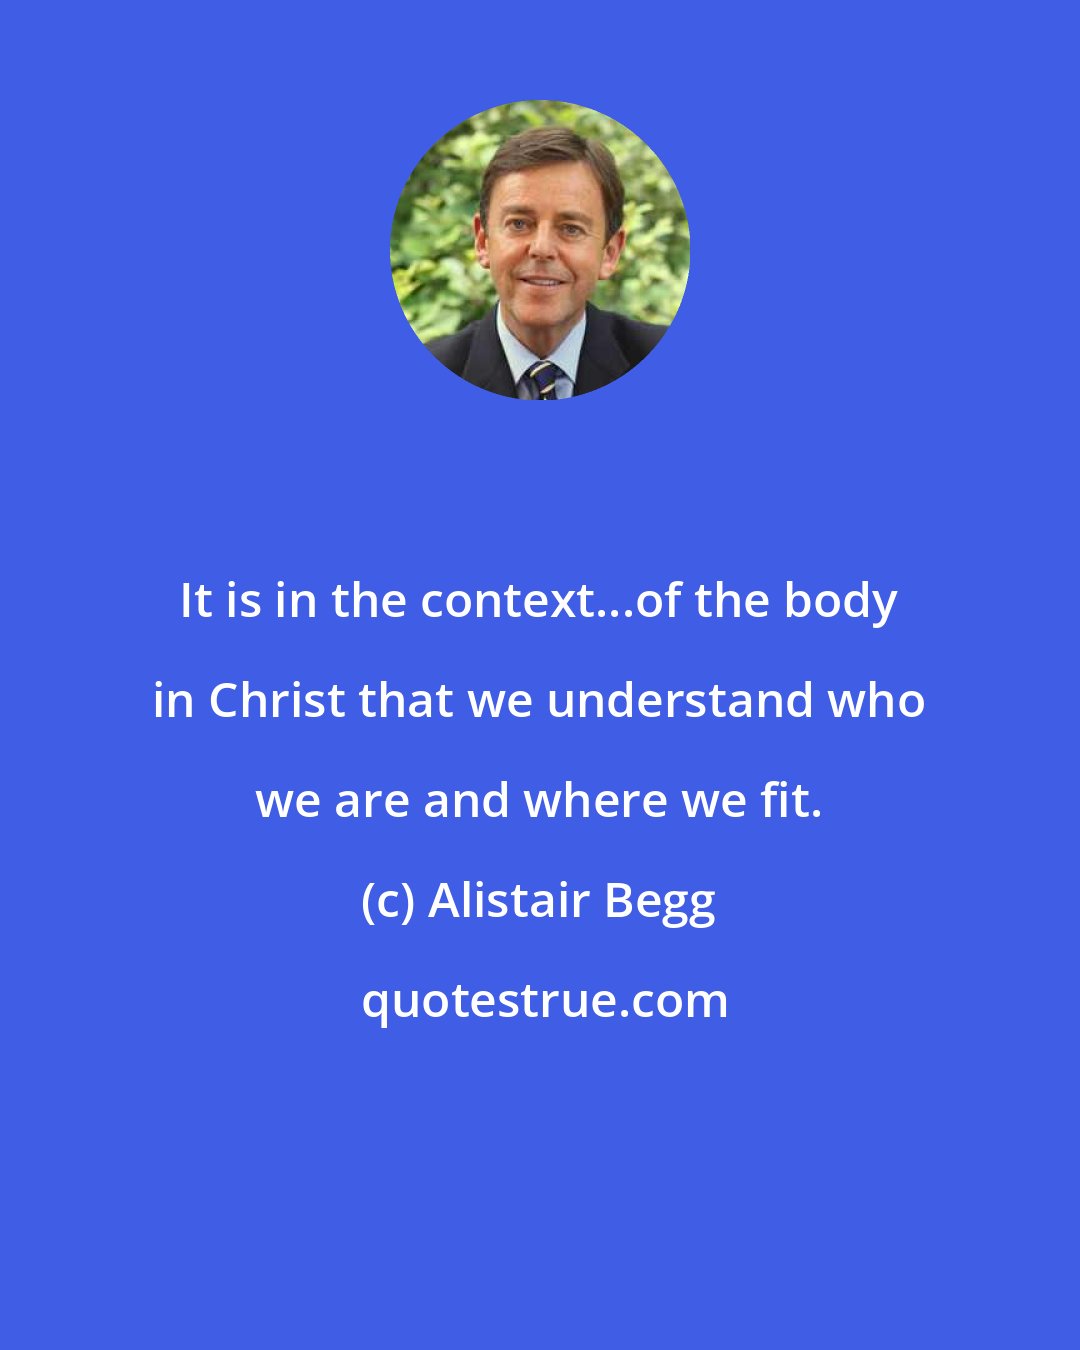 Alistair Begg: It is in the context...of the body in Christ that we understand who we are and where we fit.